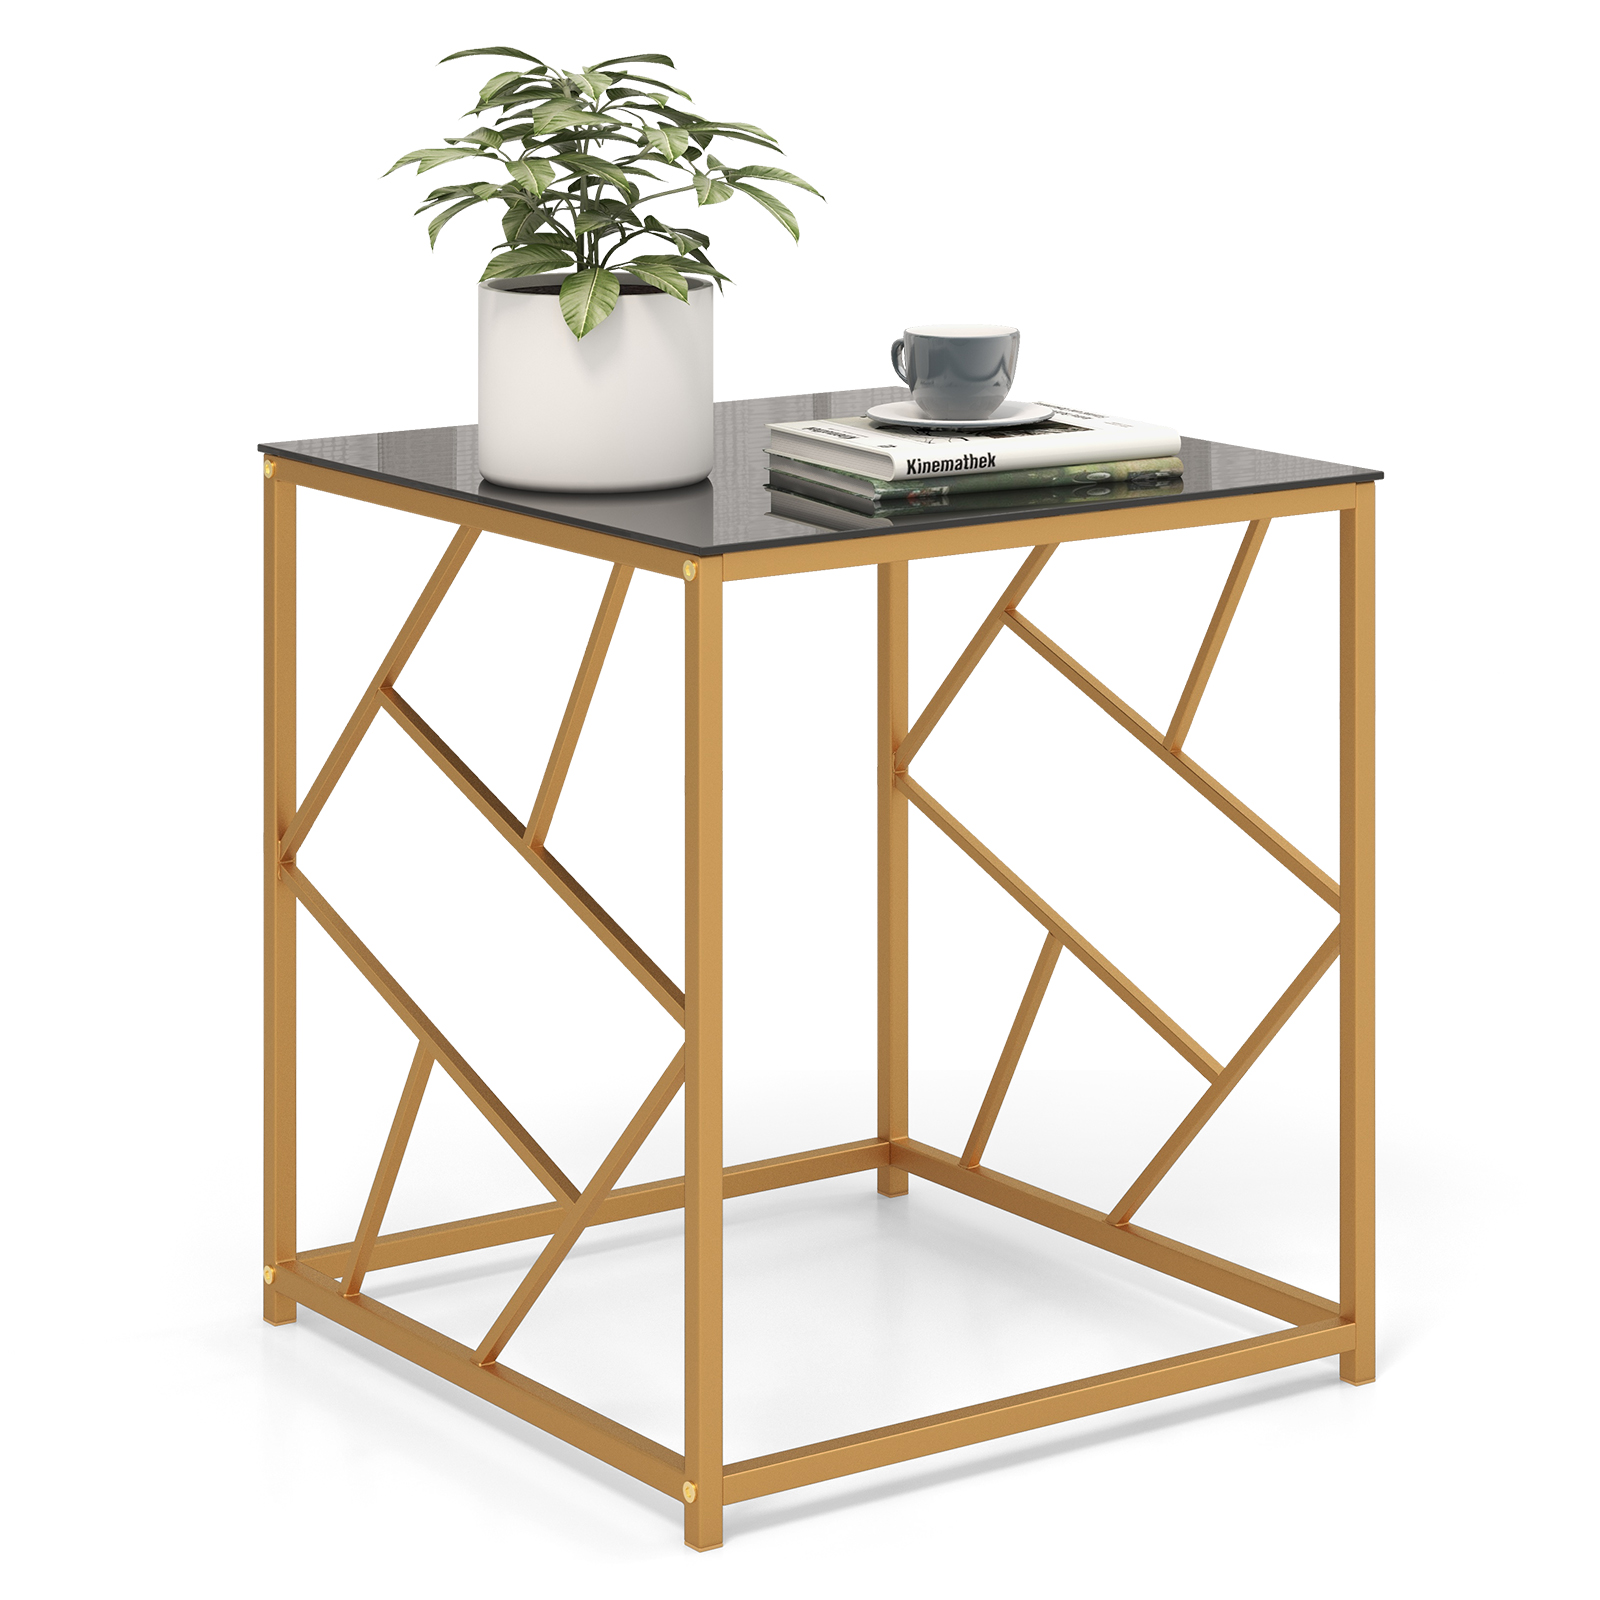 Square End Table with Tempered Glass and Gold Finish Geometric Frame-Black